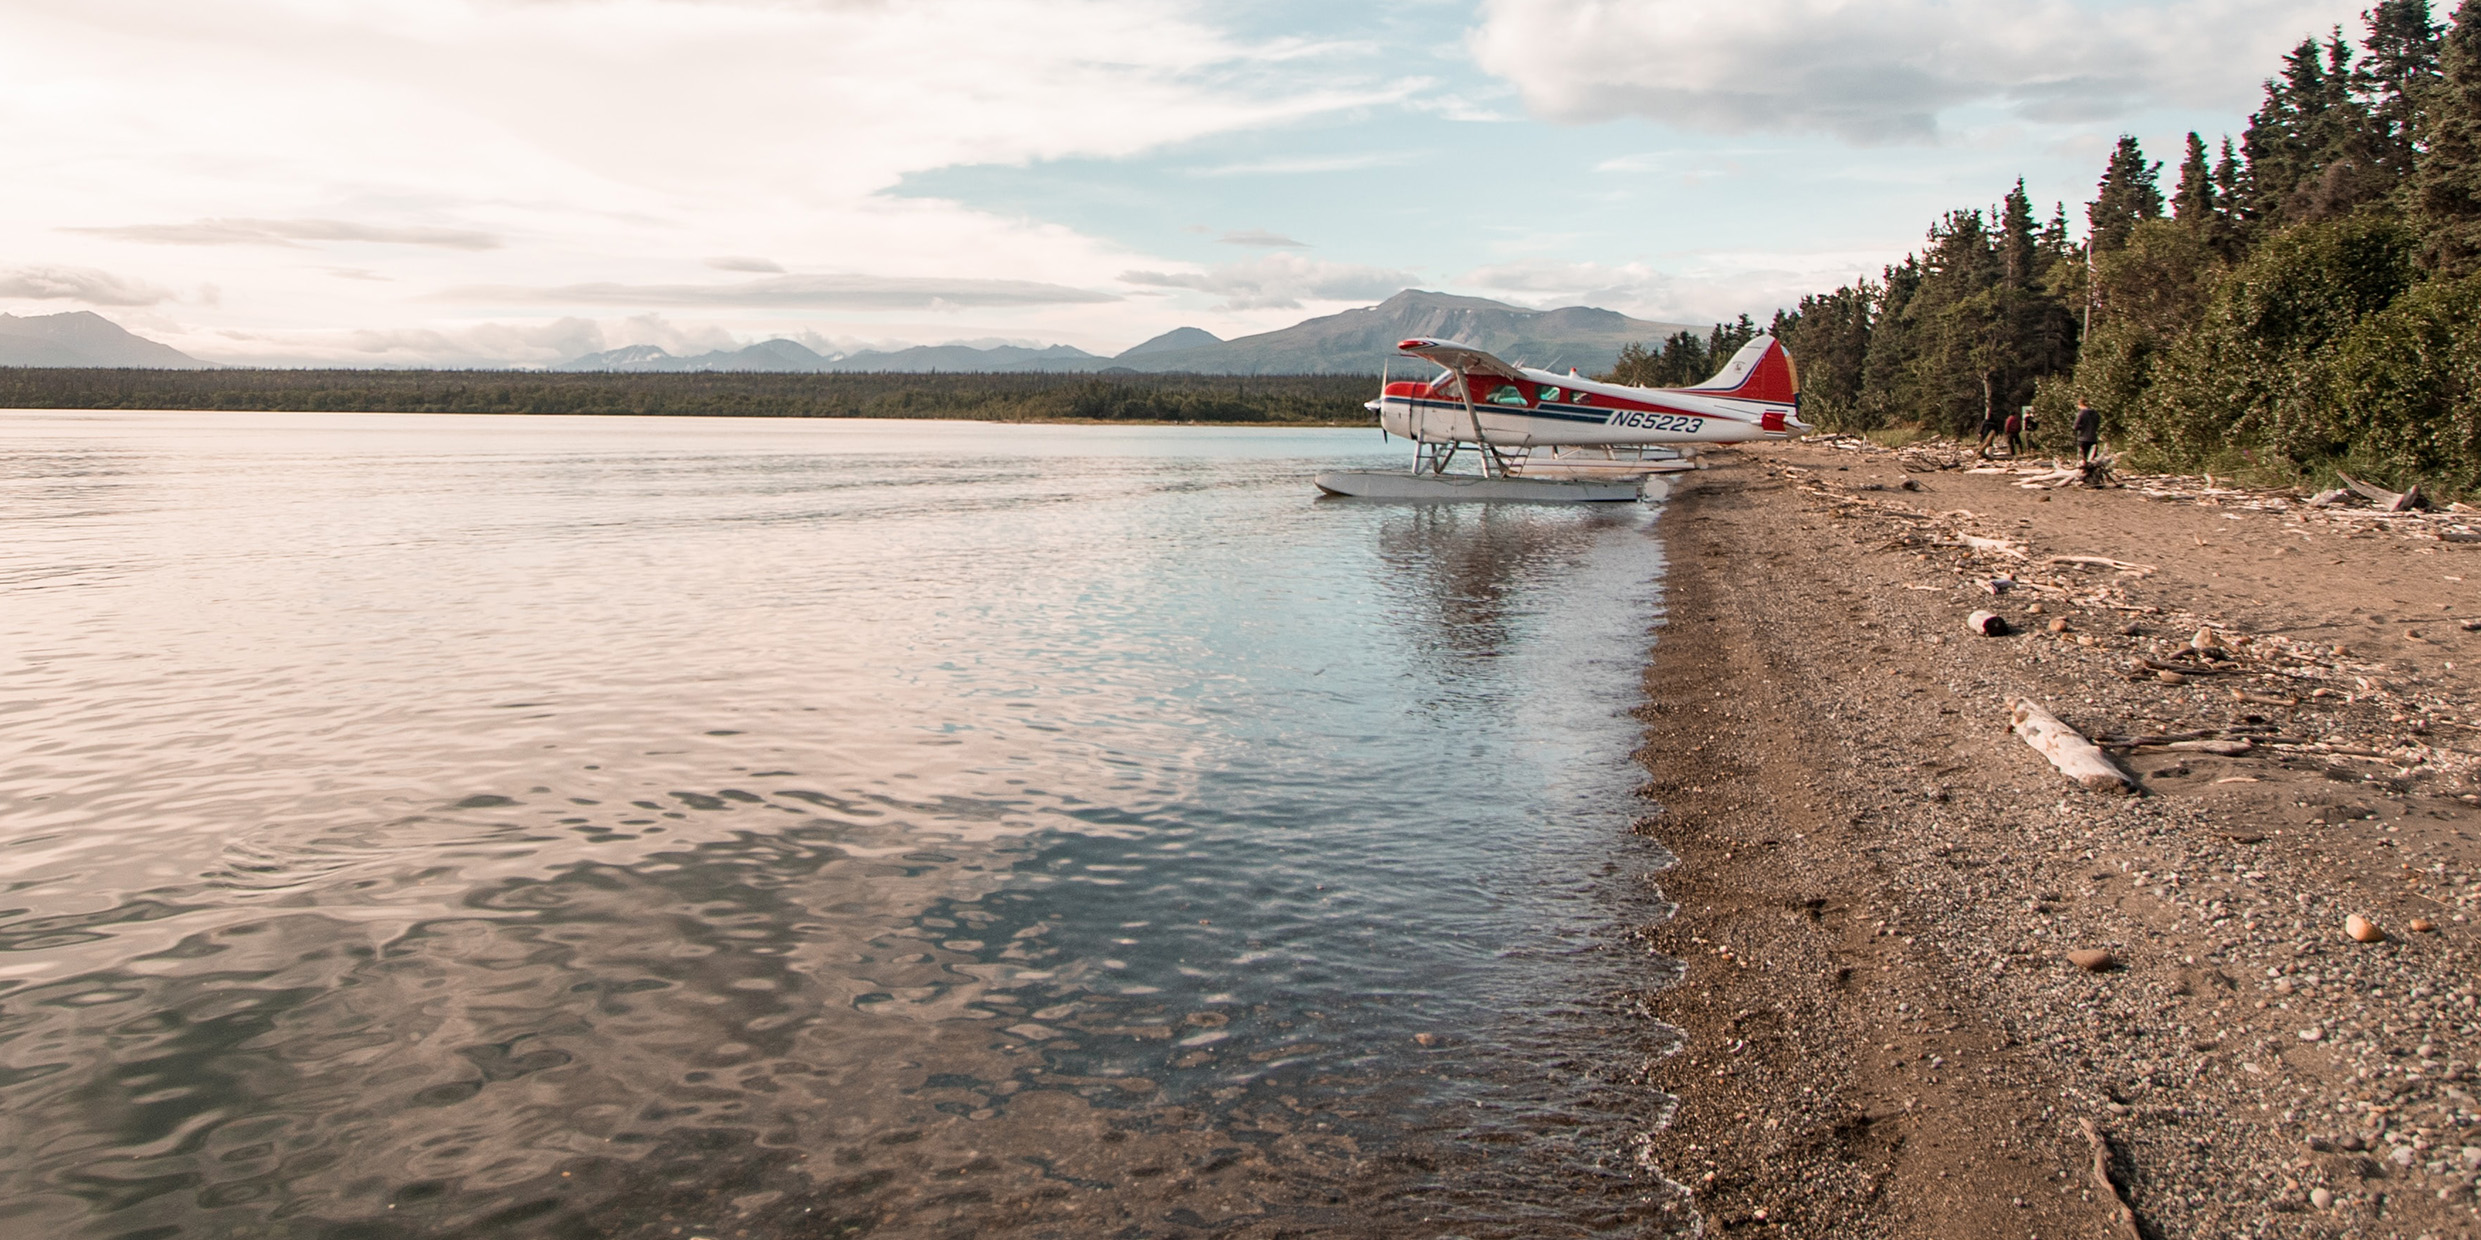 Image of a float plane on a wilderness shoreline